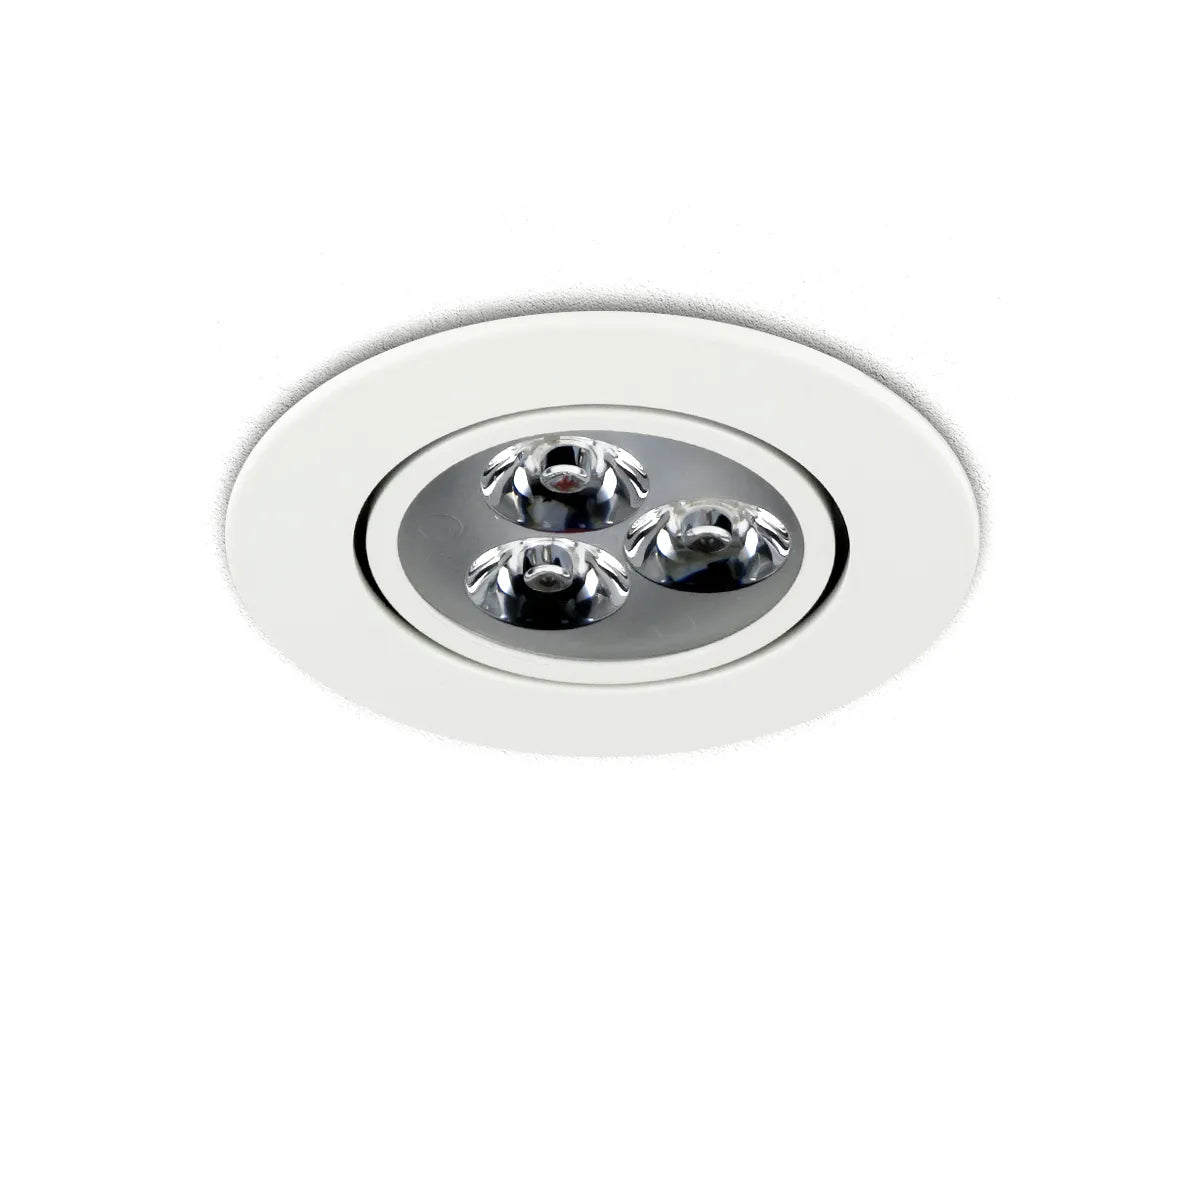 LED Recessed Spotlight 3W ⌀85mm dimmable tiltable